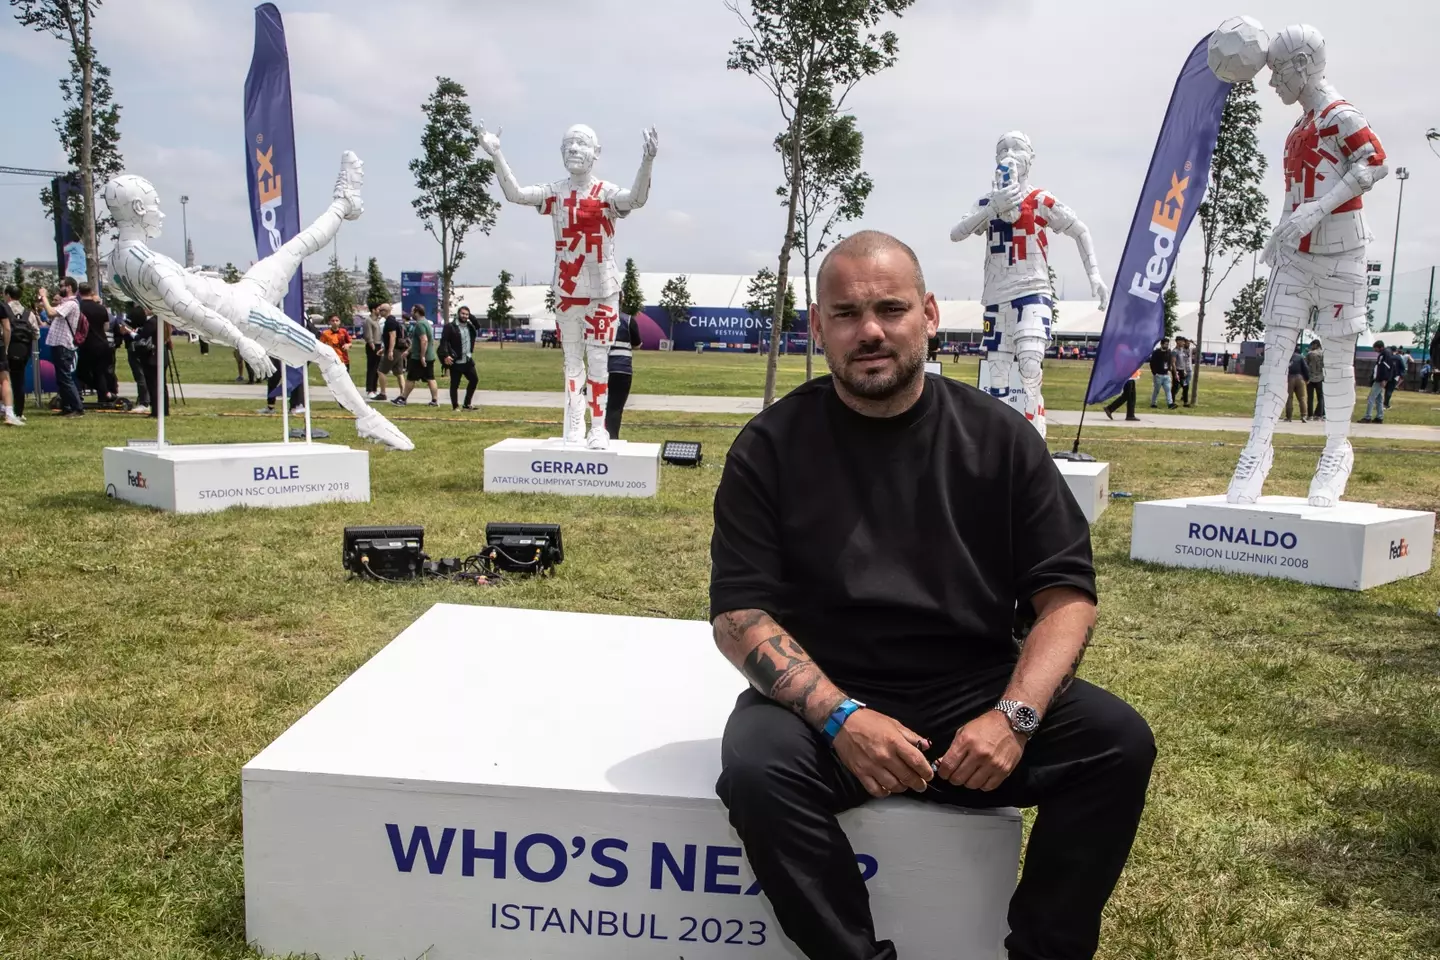 Sneijder poses with a series of Champions League final sculptures made out of 130 recycled cardboard boxes. (Image: Fedex)